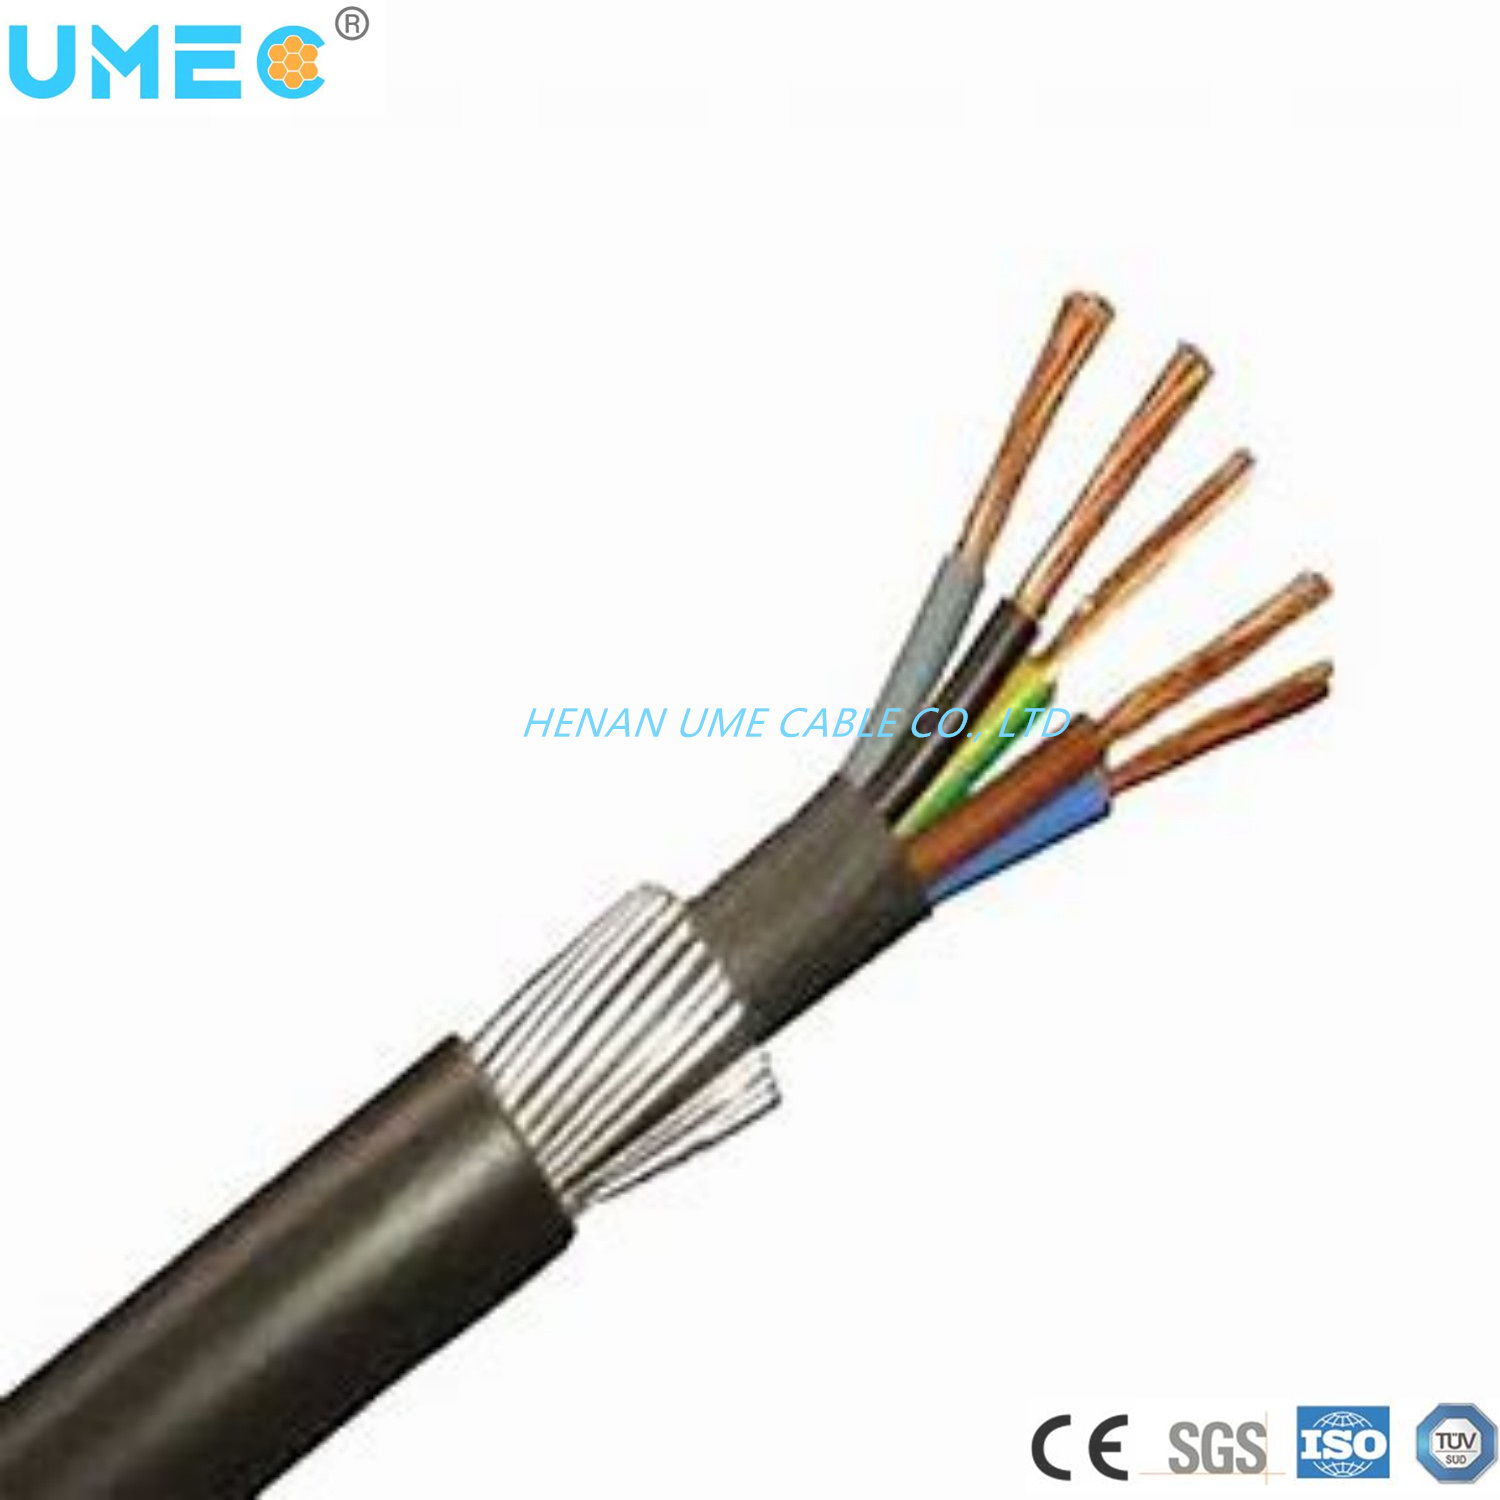 Undergroun and in Water Power Cable Swa Cable